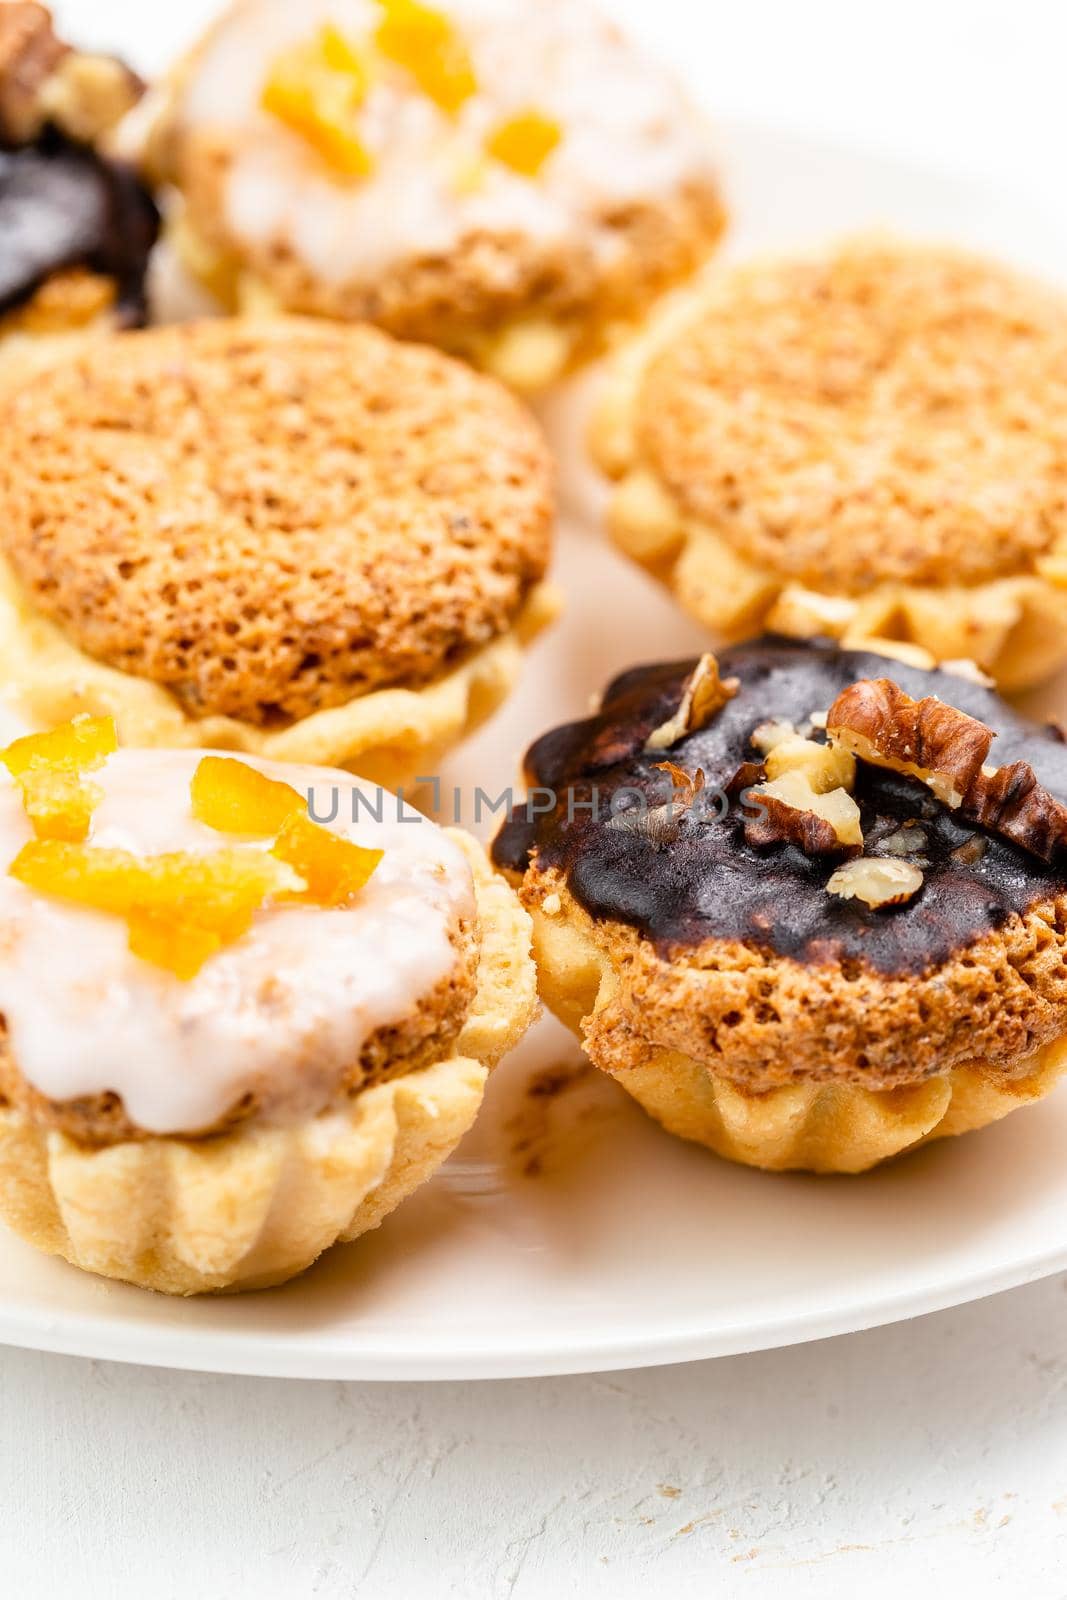 Sweet mini tart served on white plate. Homemade tasty tartlets with walnuts. Tartelette close up